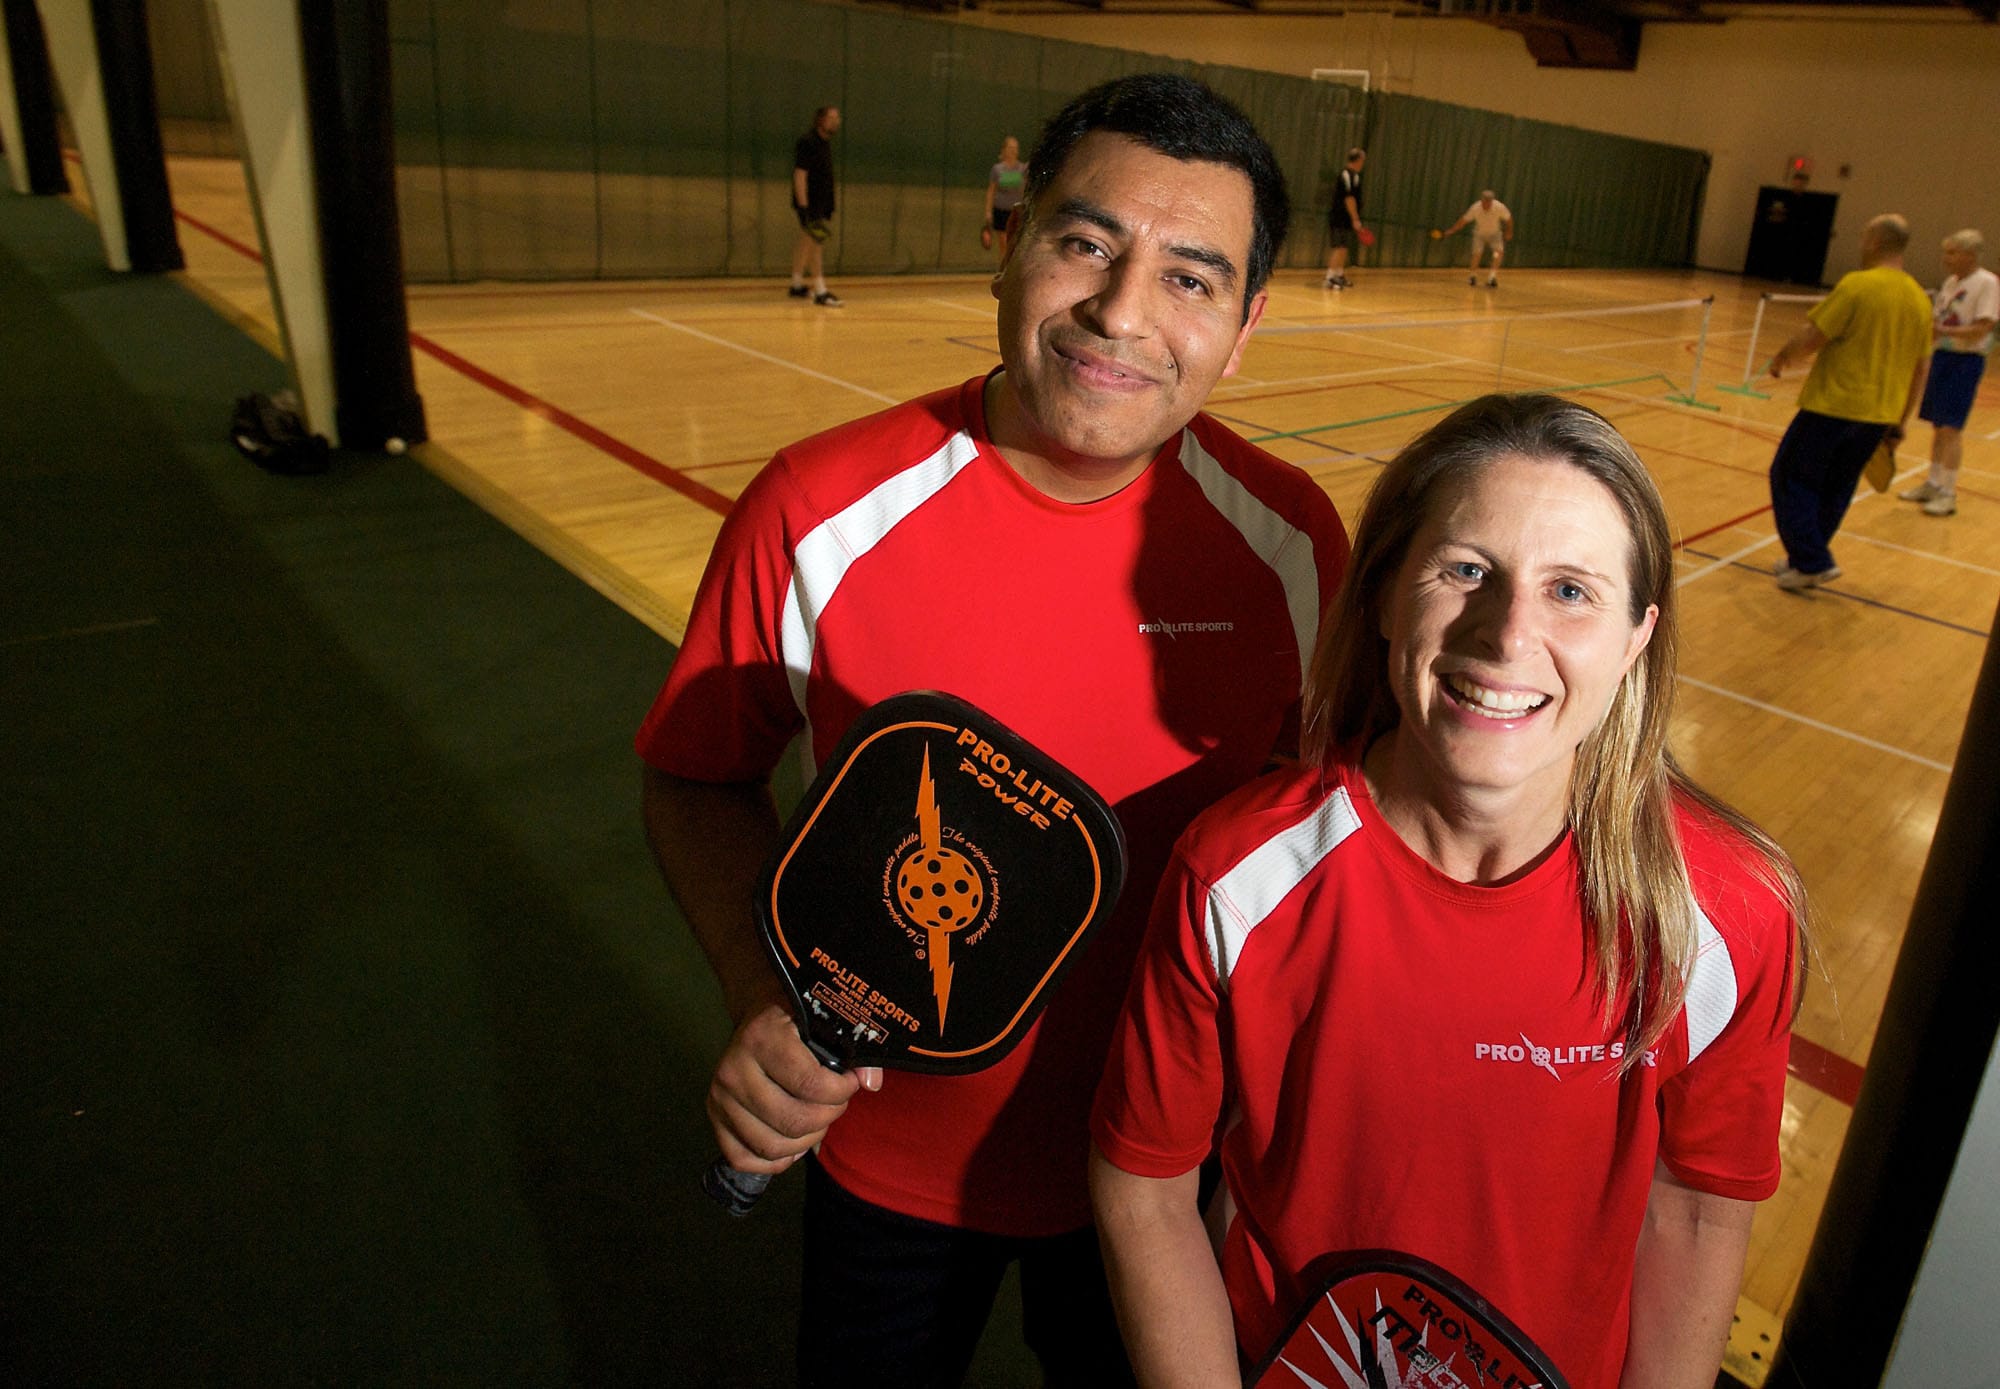 Enrique Ruiz of Washougal and Christine Barksdale of Vancouver are nationally ranked pickleball champions.